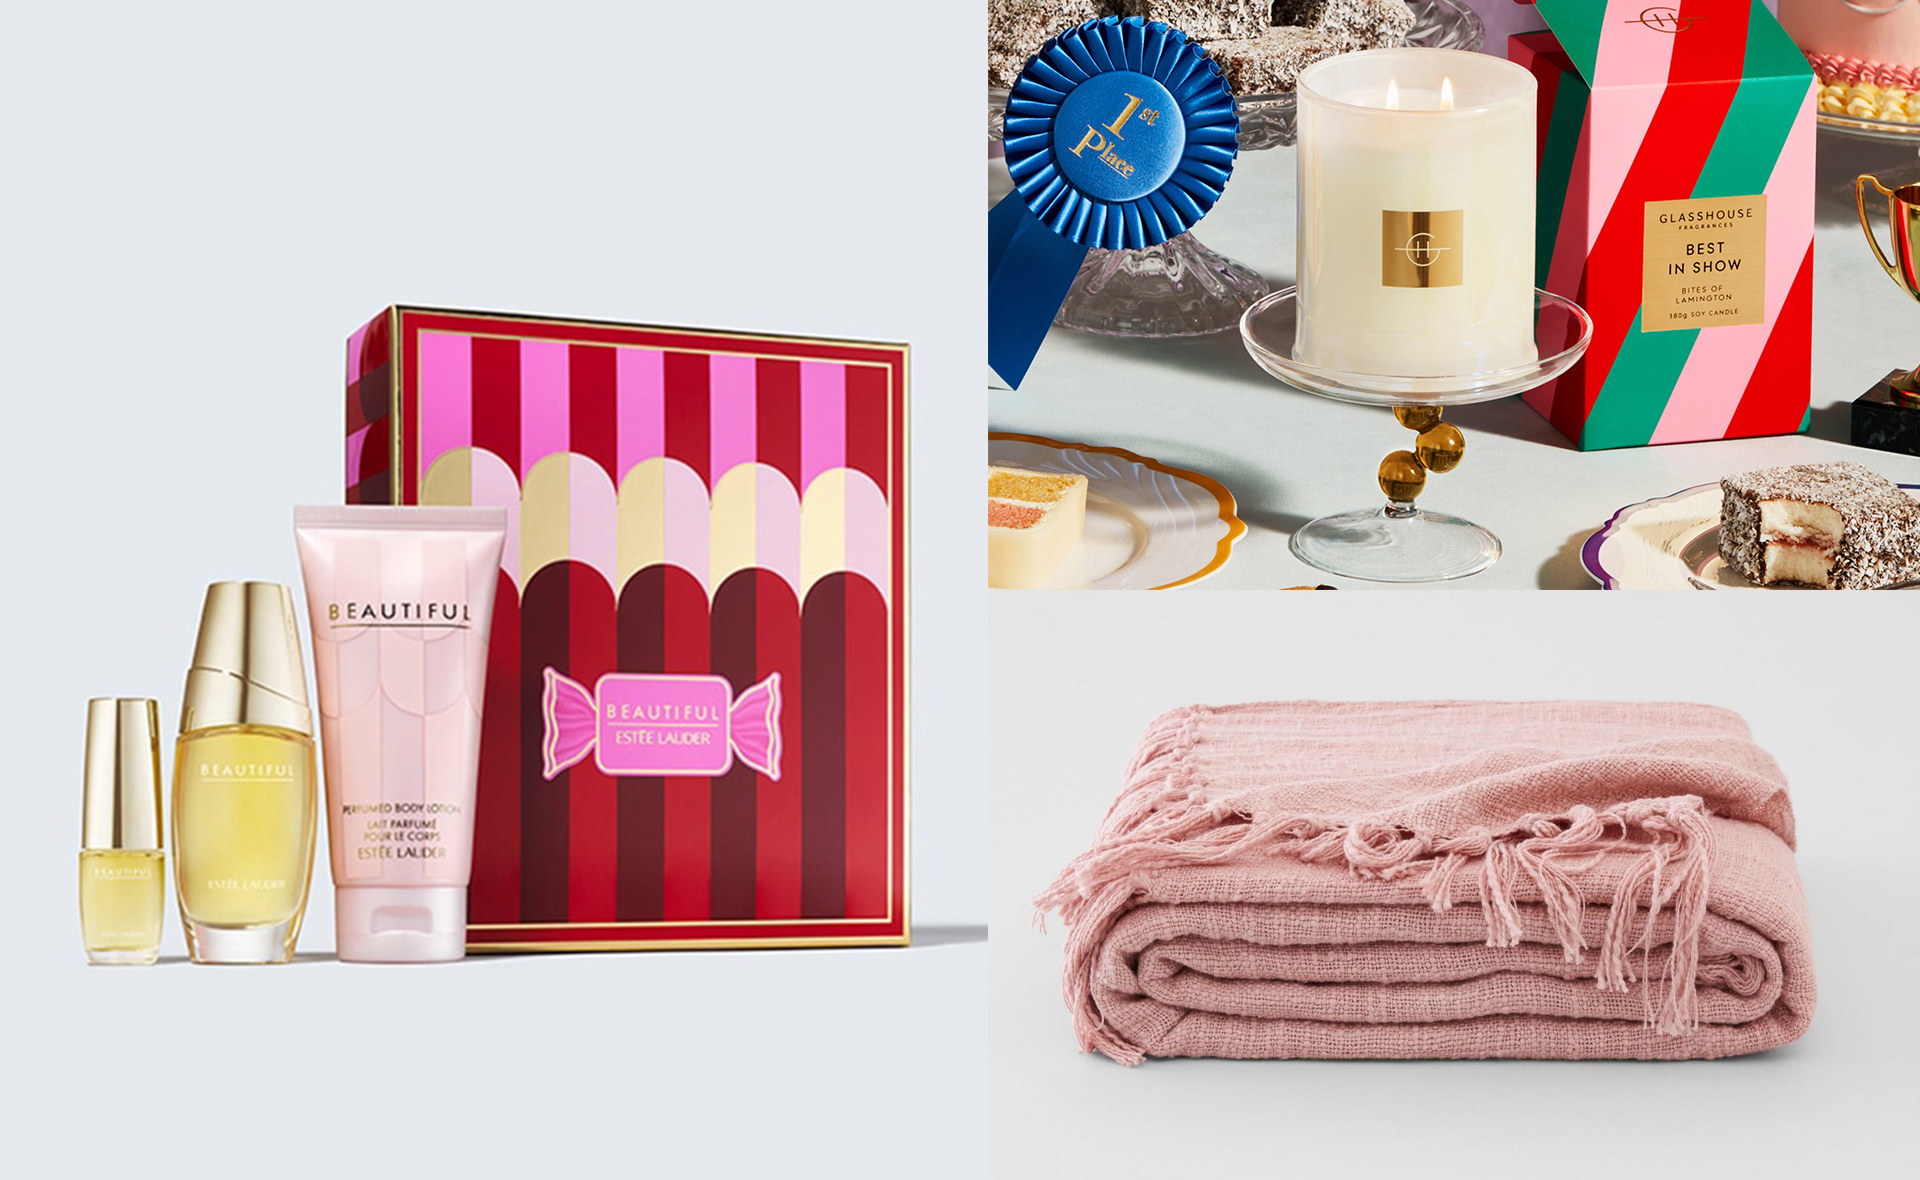 Who says you can’t enjoy Valentine’s Day if you’re single? The best gifts to buy for yourself on the global day of love